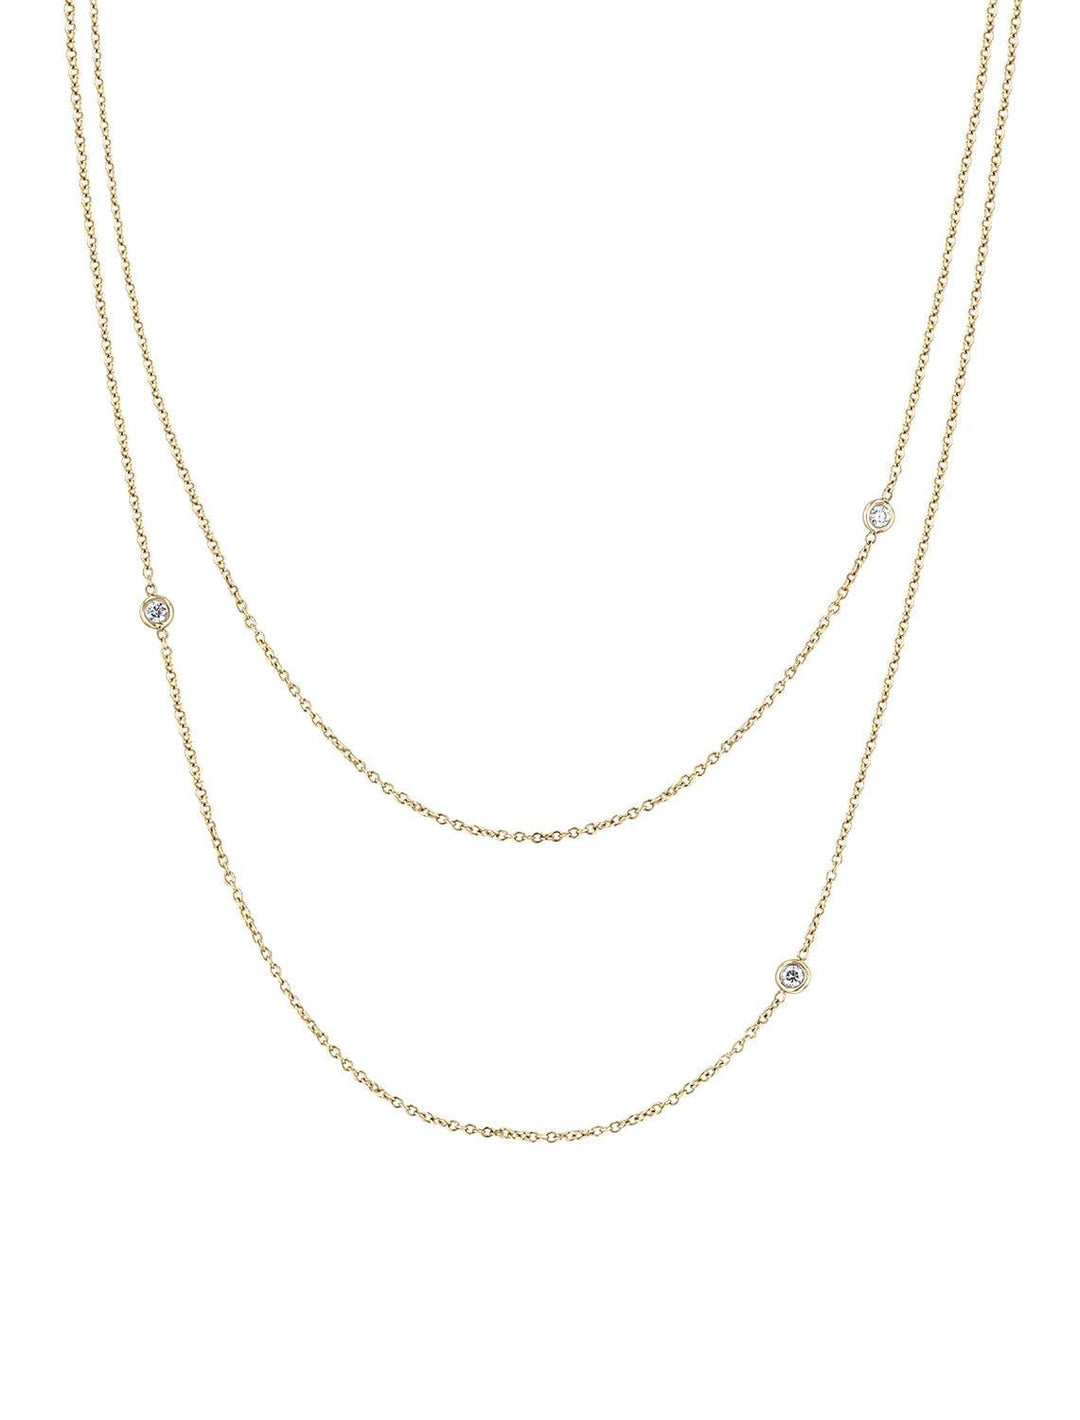 Front view of Zoe Chicco's 14K Double Layer Floating Diamonds Chain.